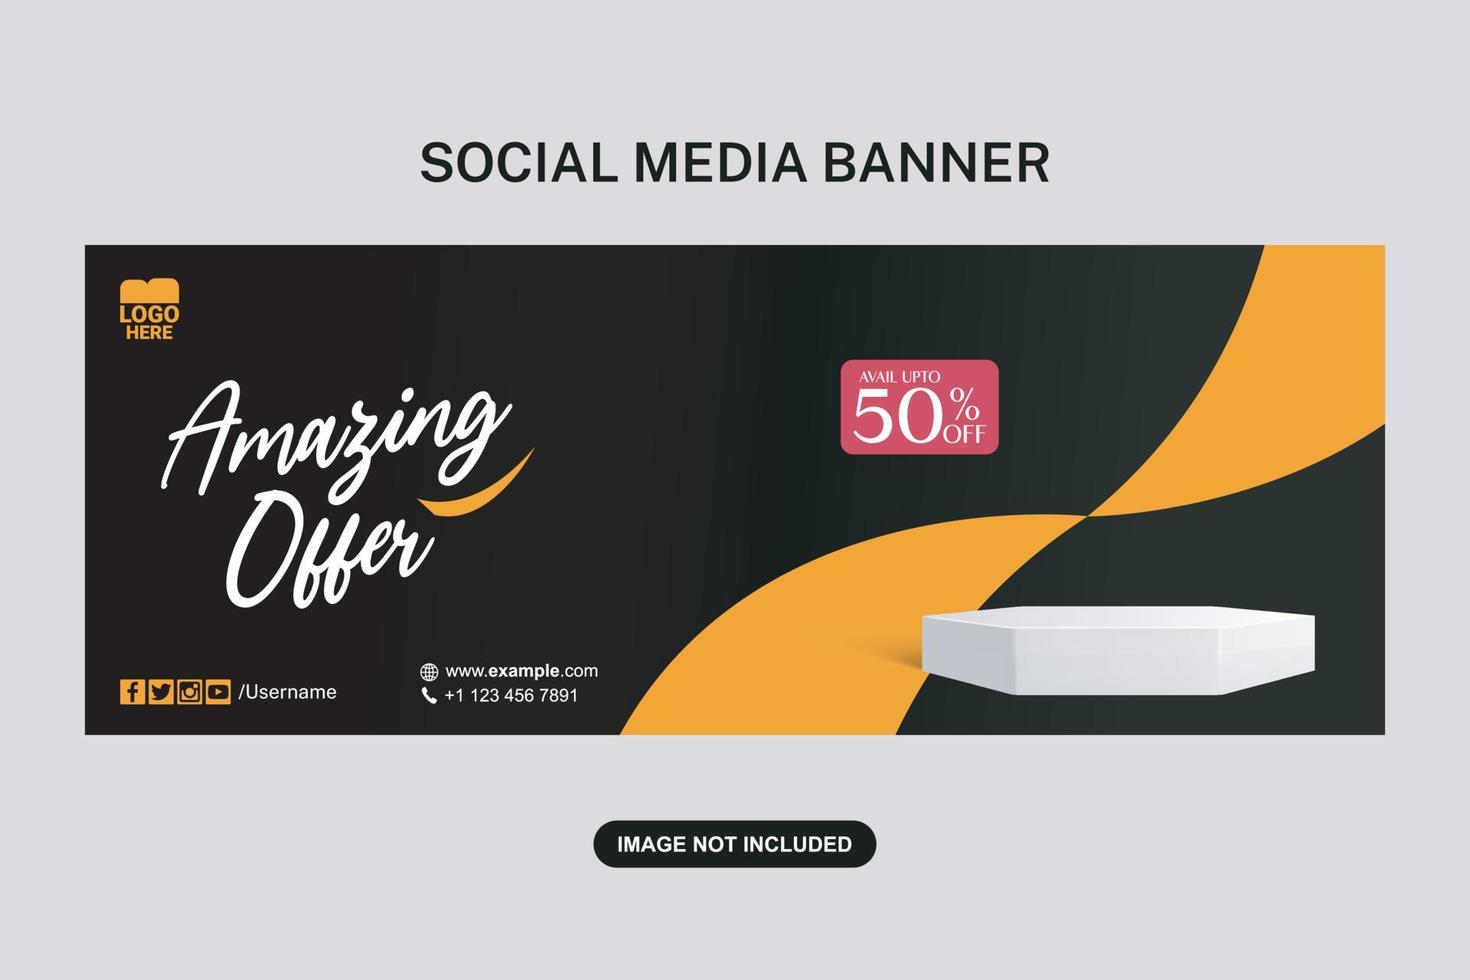 amazing offer deal lady hand bag social banner design fashionable vector